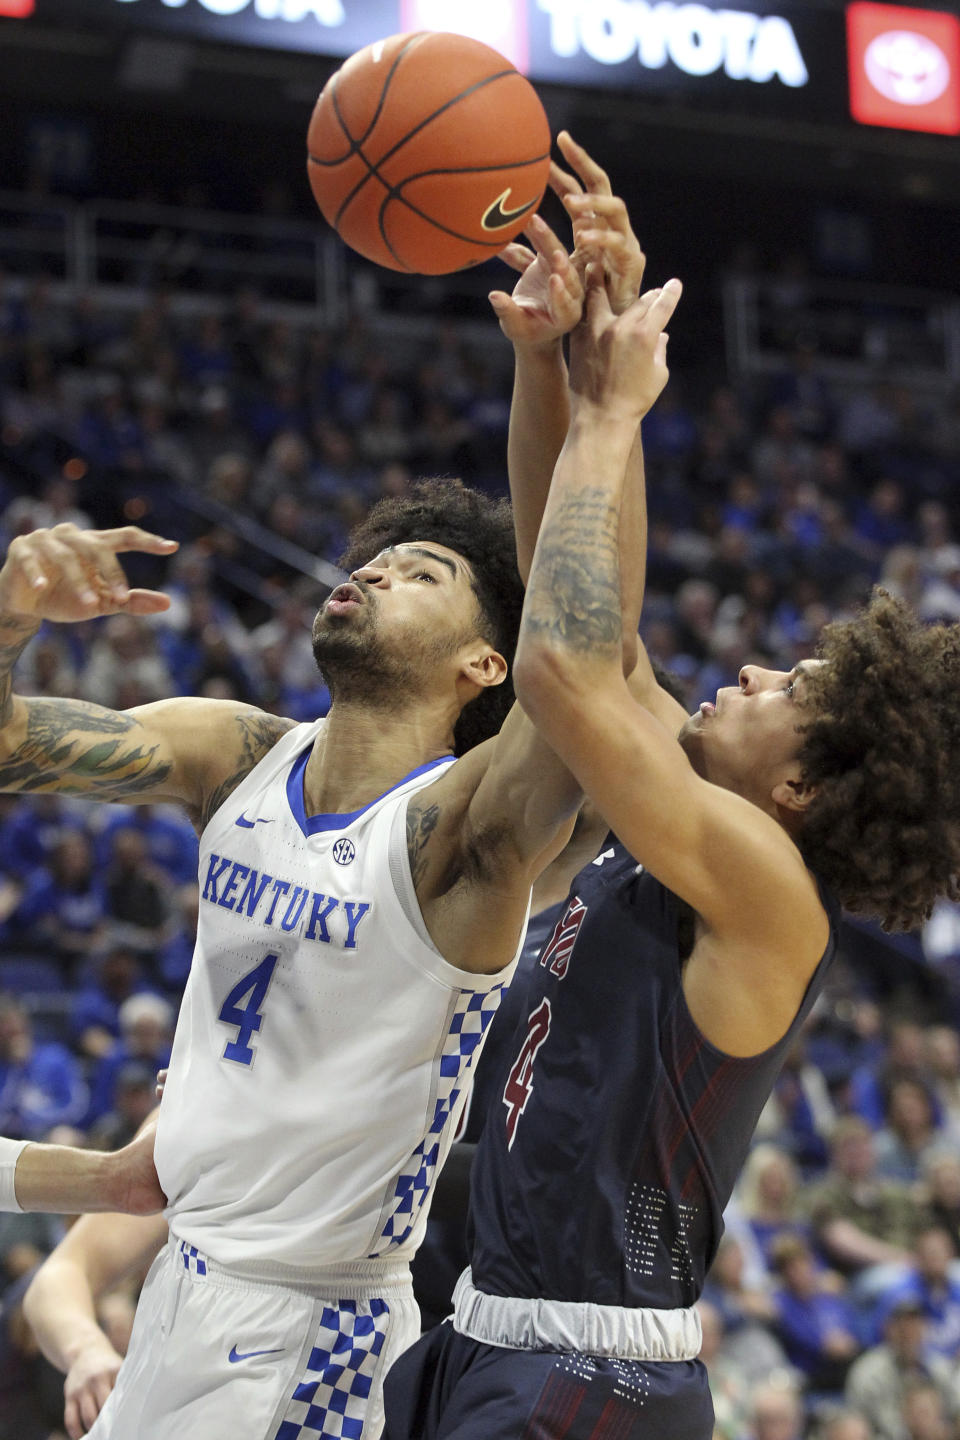 Kentucky's Nick Richards, left, and Fairleigh Dickinson's Brandon Powell, right, battle for a rebound during the first half of an NCAA college basketball game in Lexington, Ky., Saturday, Dec. 7, 2019. (AP Photo/James Crisp)